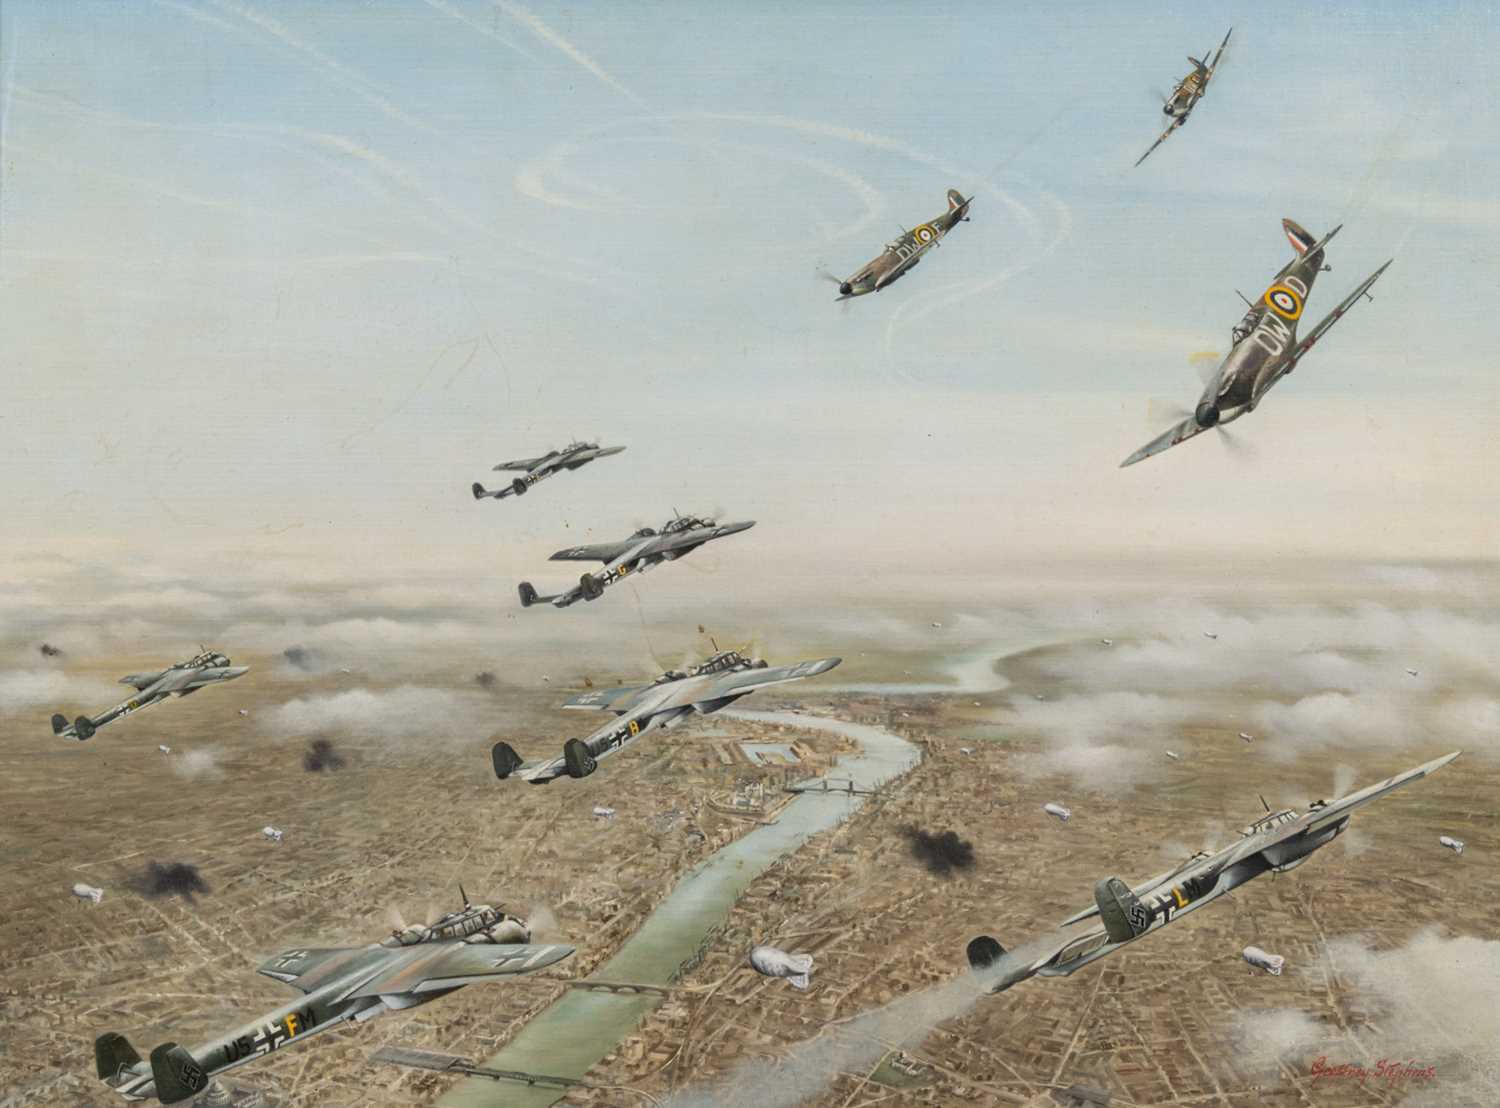 ‡ THE MILITARY CLUB HOUSE: GEOFFREY STEPHENS (20th Century) oil on board - 'Dorniers Over London',